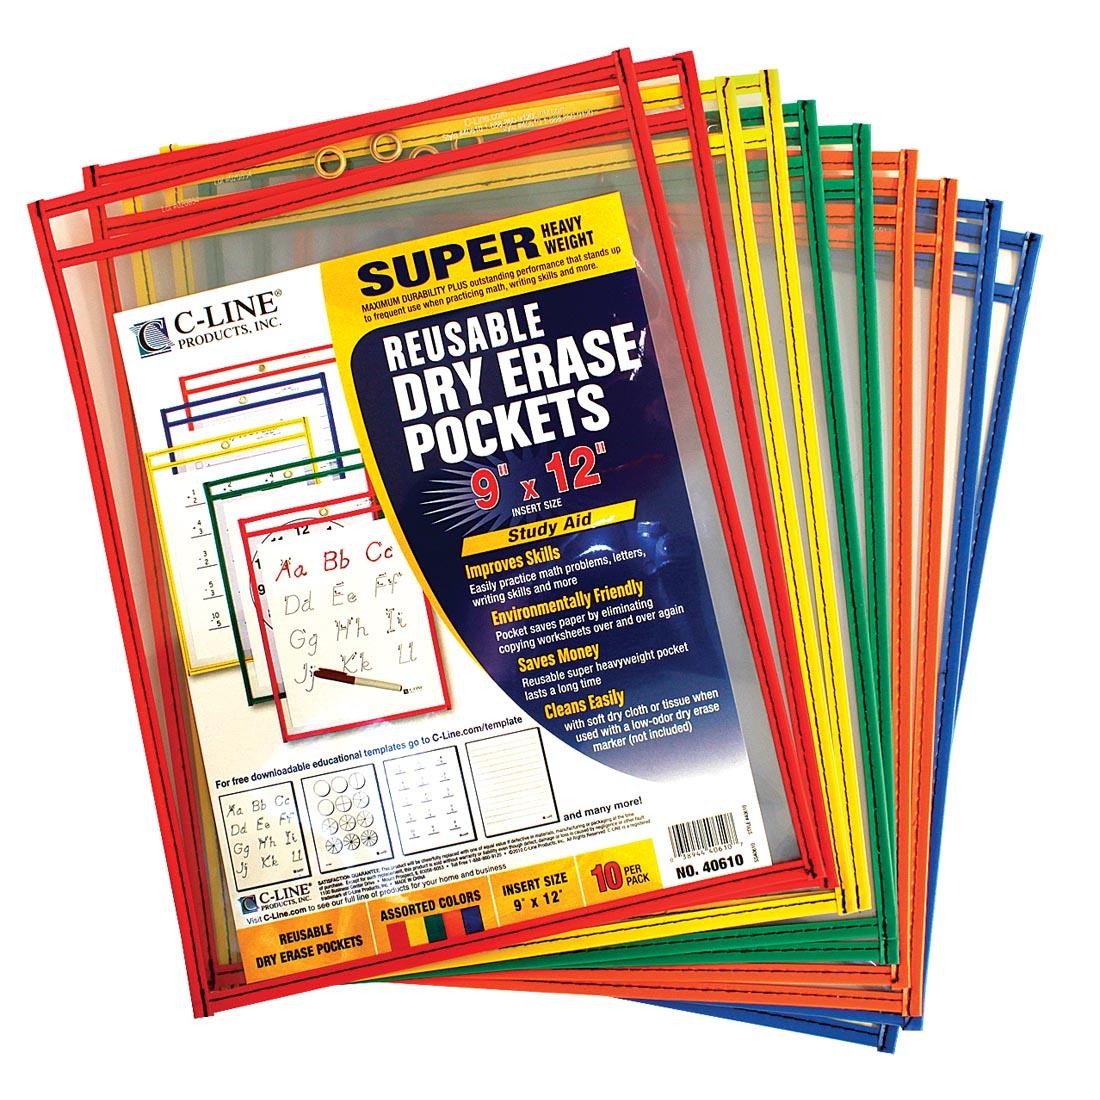 10 Super Heavy Weight Reusable Dry Erase Pockets